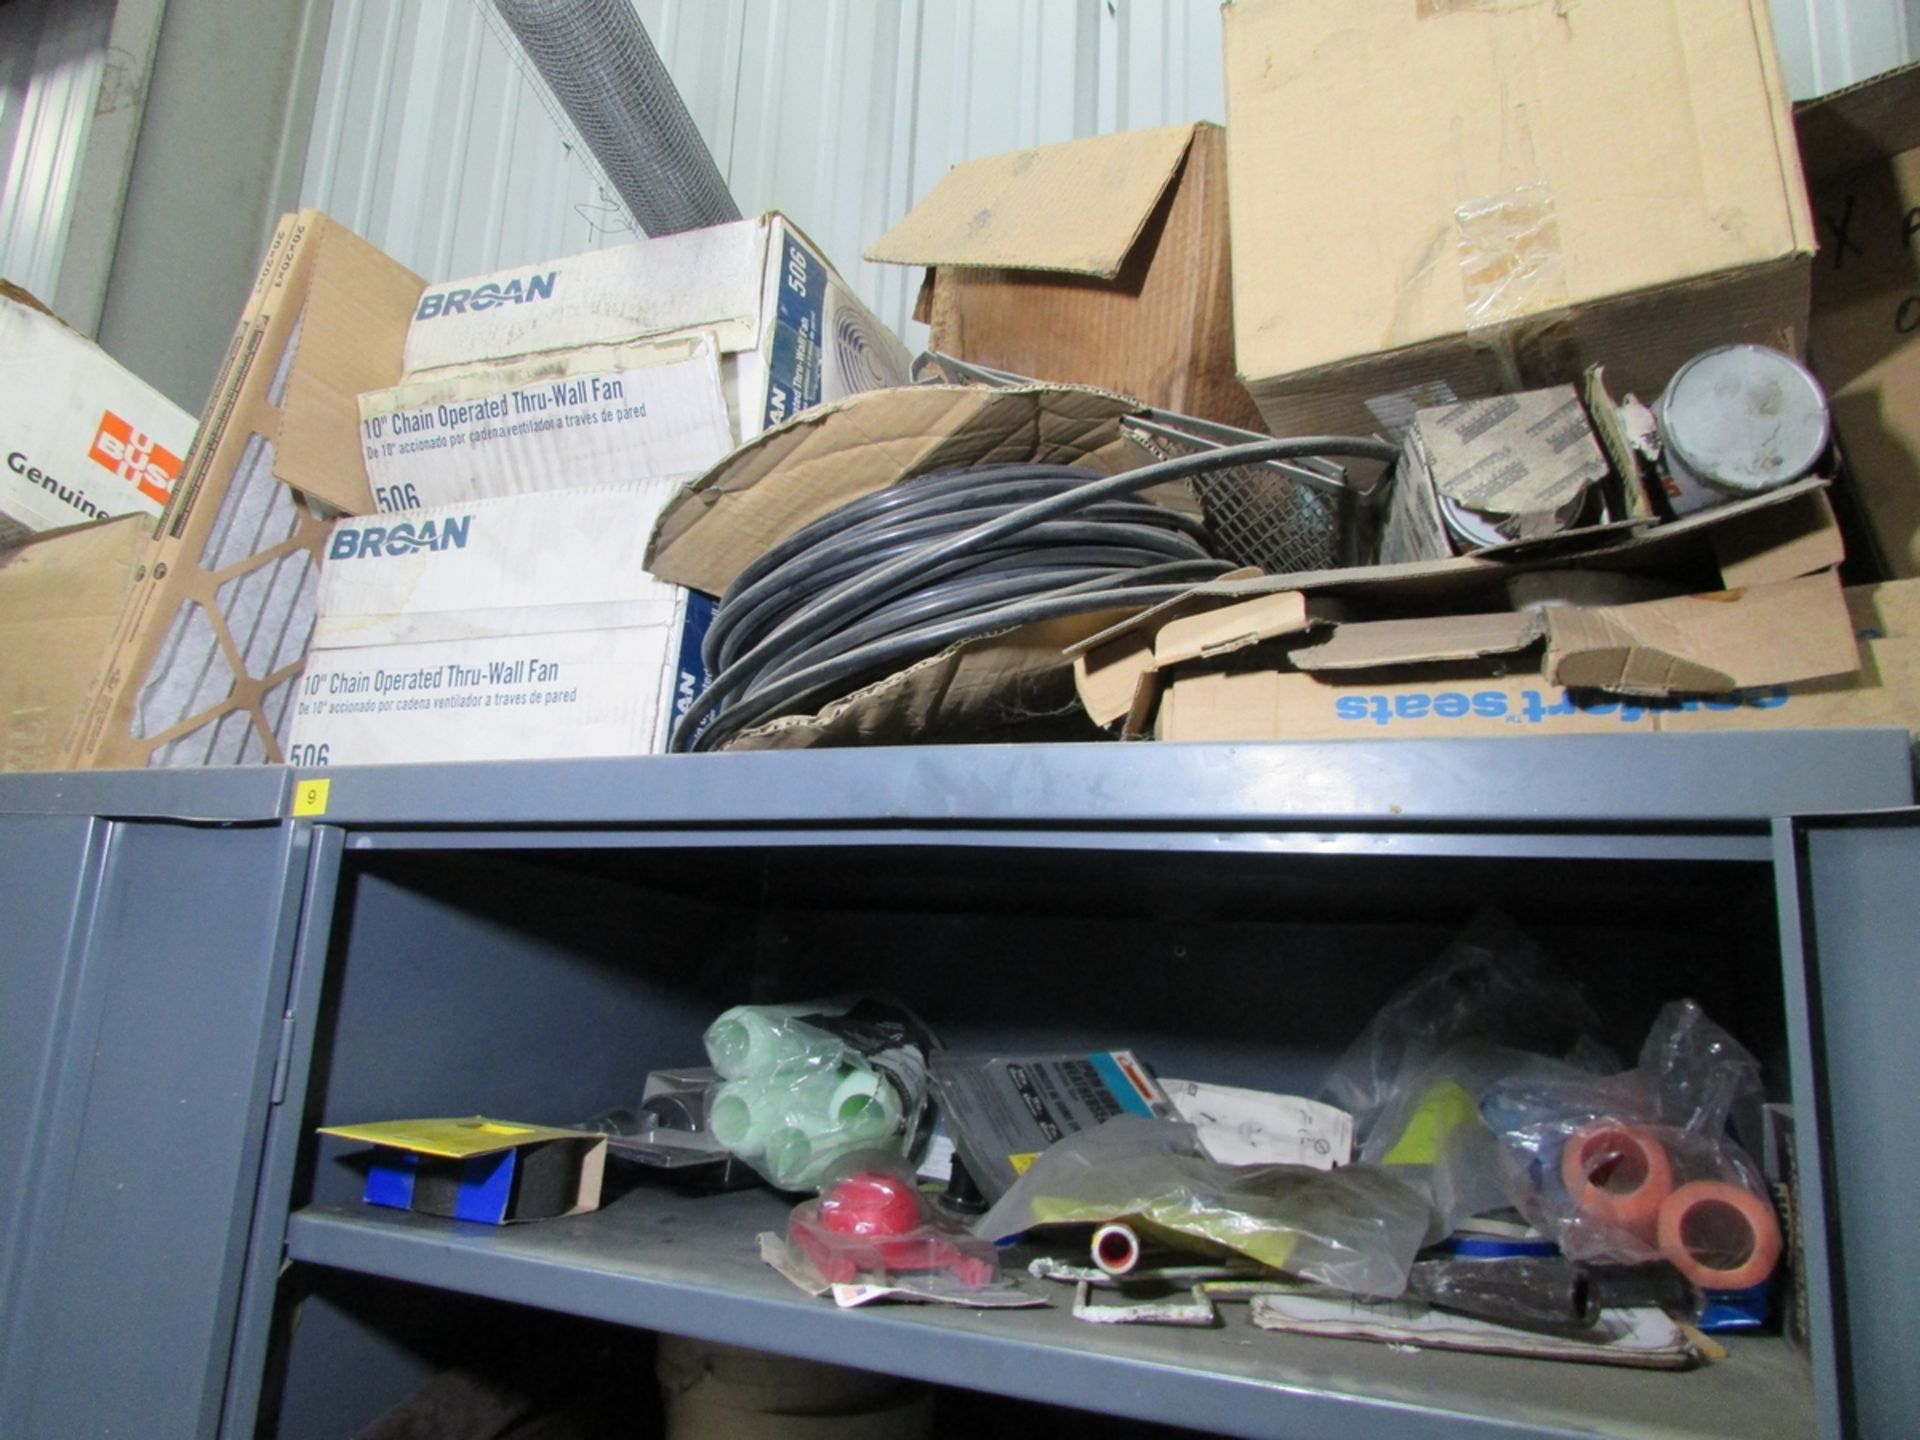 LOT - (2) 2-DOOR CABINETS, W/ CONTENTS: ASSORTED PAINT SUPPLIES, BATHROOM FACILITY PARTS, ETC. - Image 6 of 8